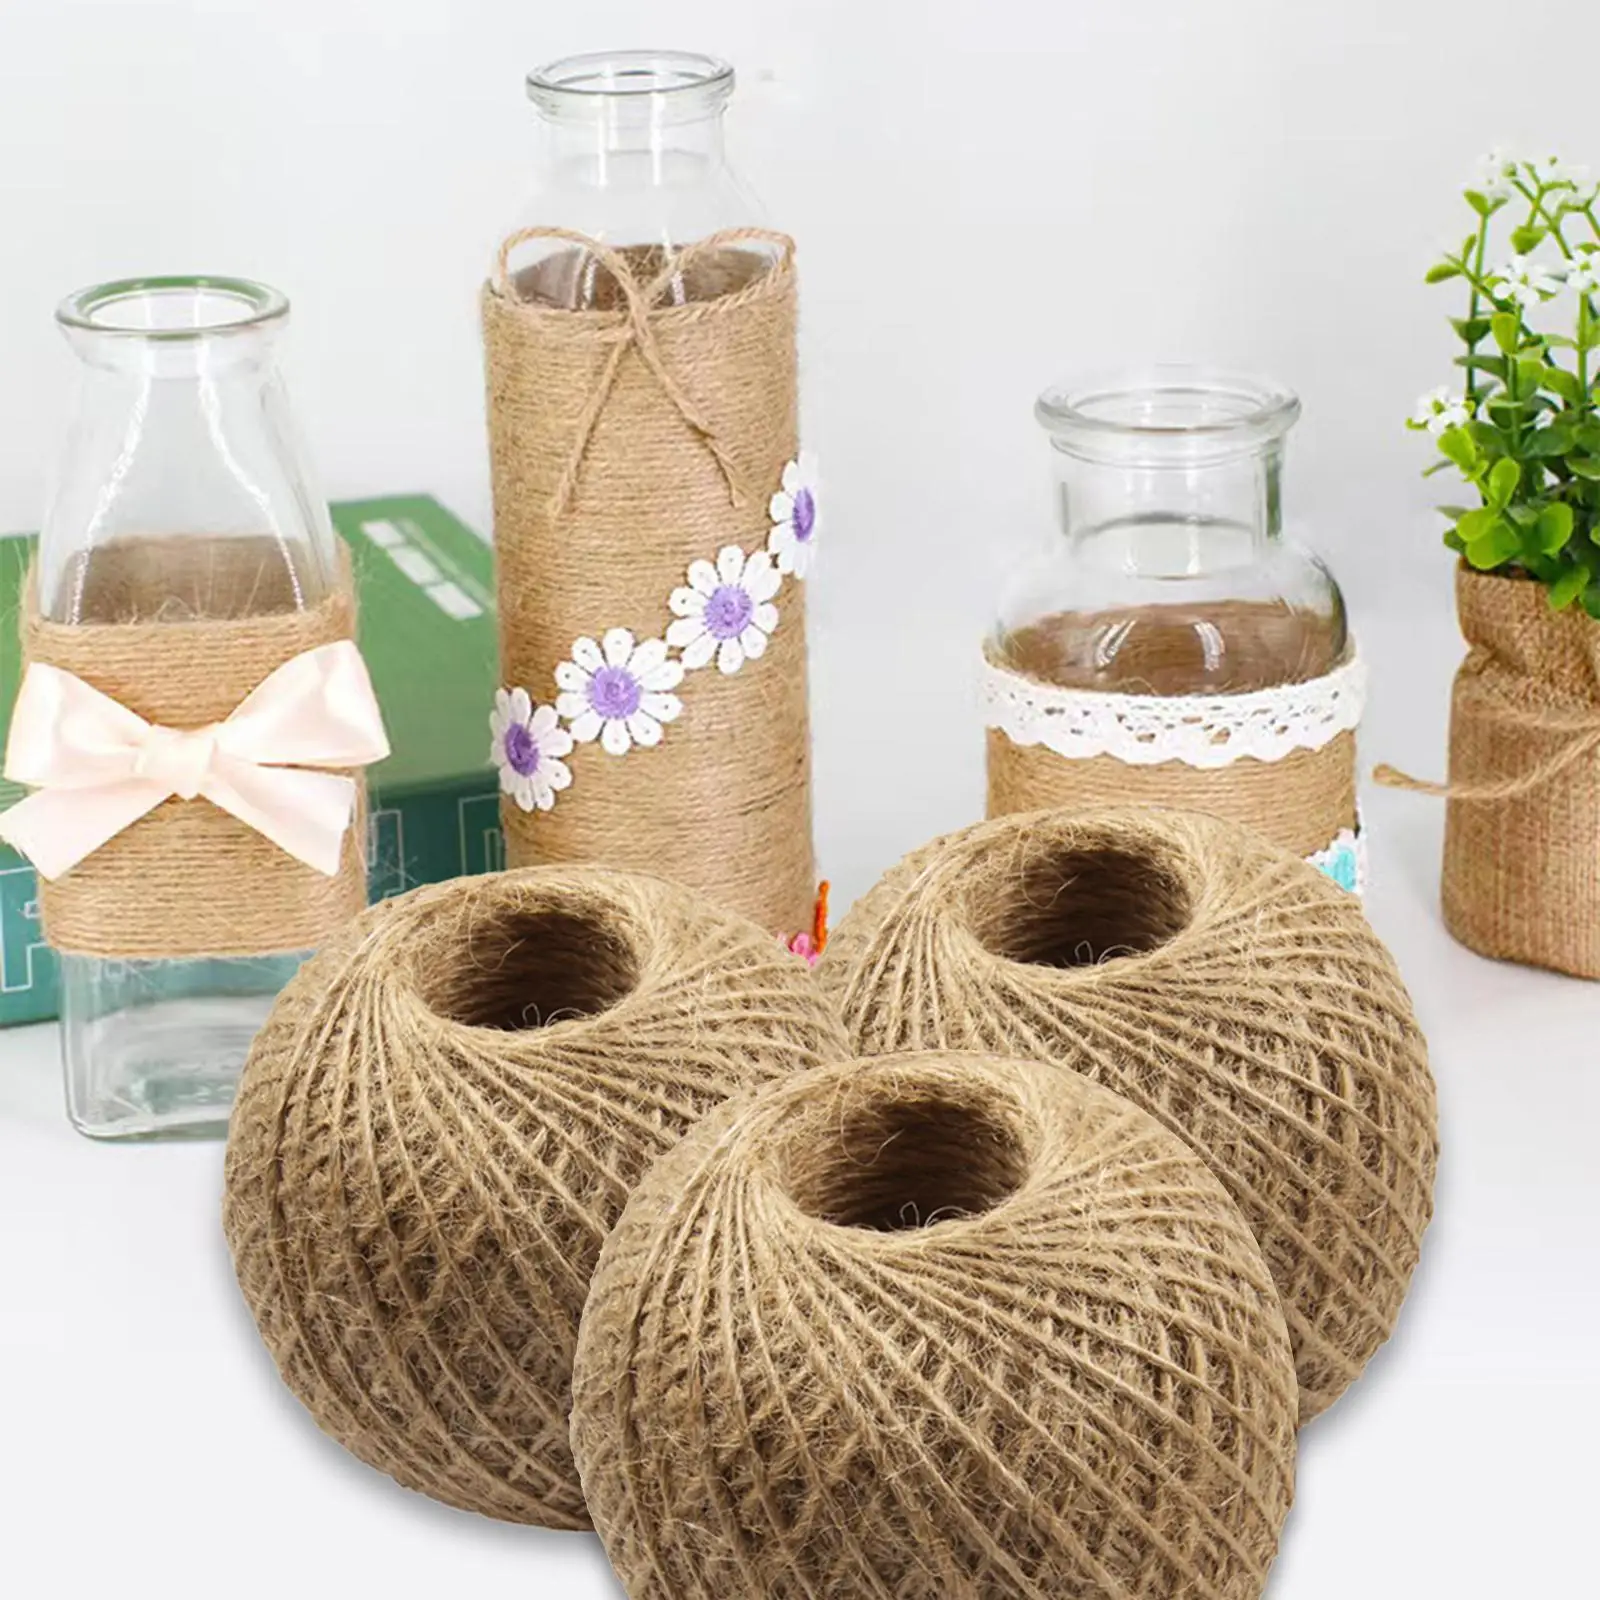 3Pcs Wedding Gift Wrap Decorative String 262.5ft 2mm Hemp Twine String for Gardening Arts Crafts Artworks Bakery Boxes Wrapping